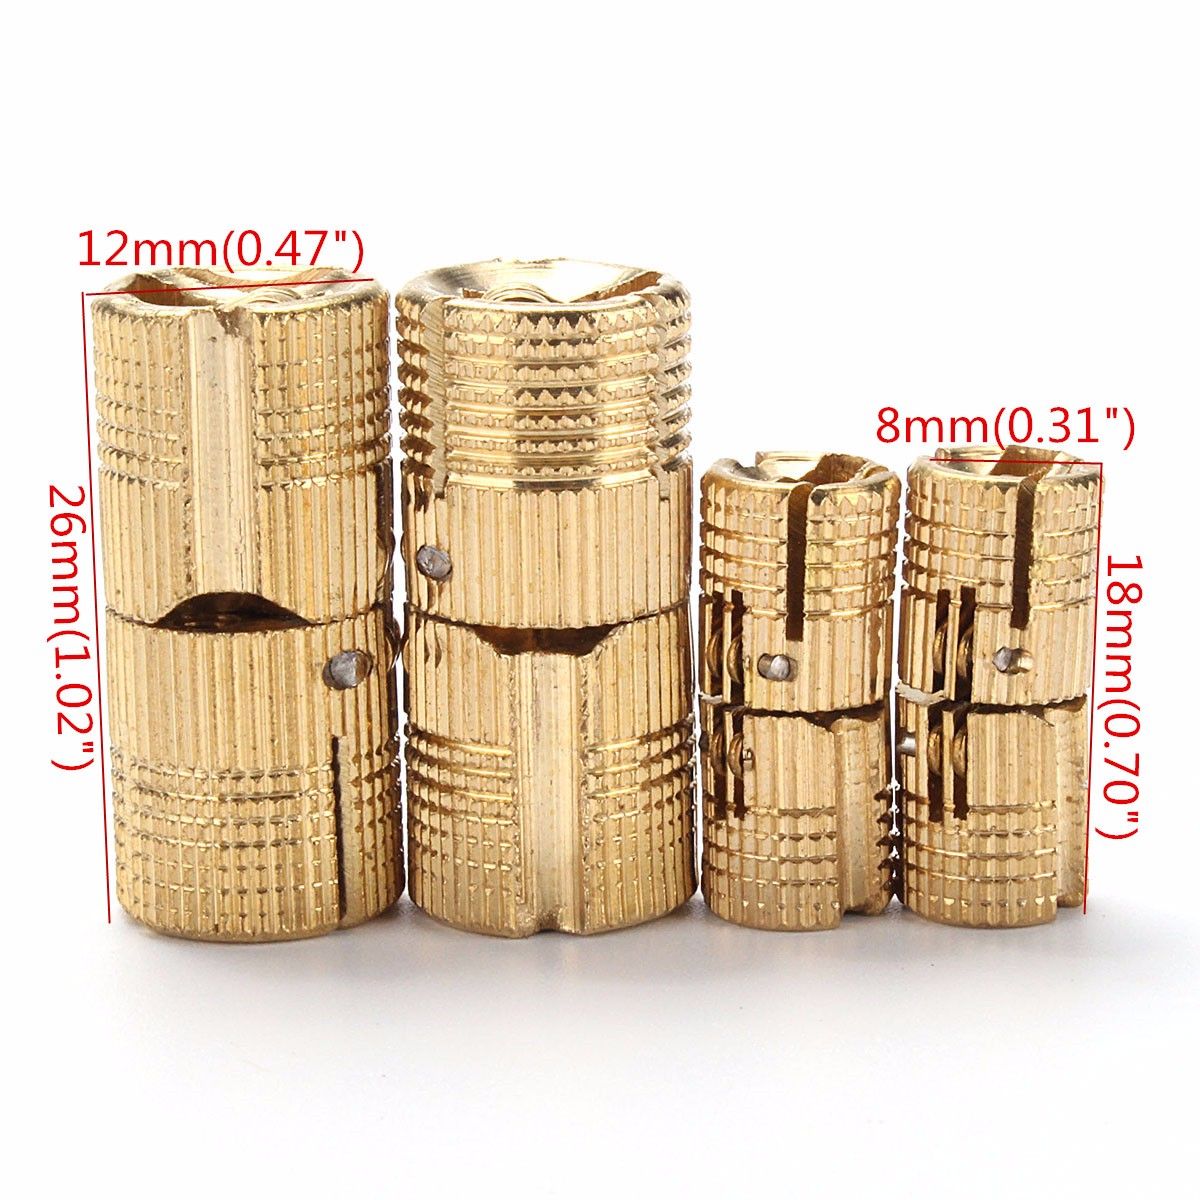 4pcs-Round-Brass-Hinge-Invisible-Fold-Doorway-Pages-Table-Folding-Extension-1078505